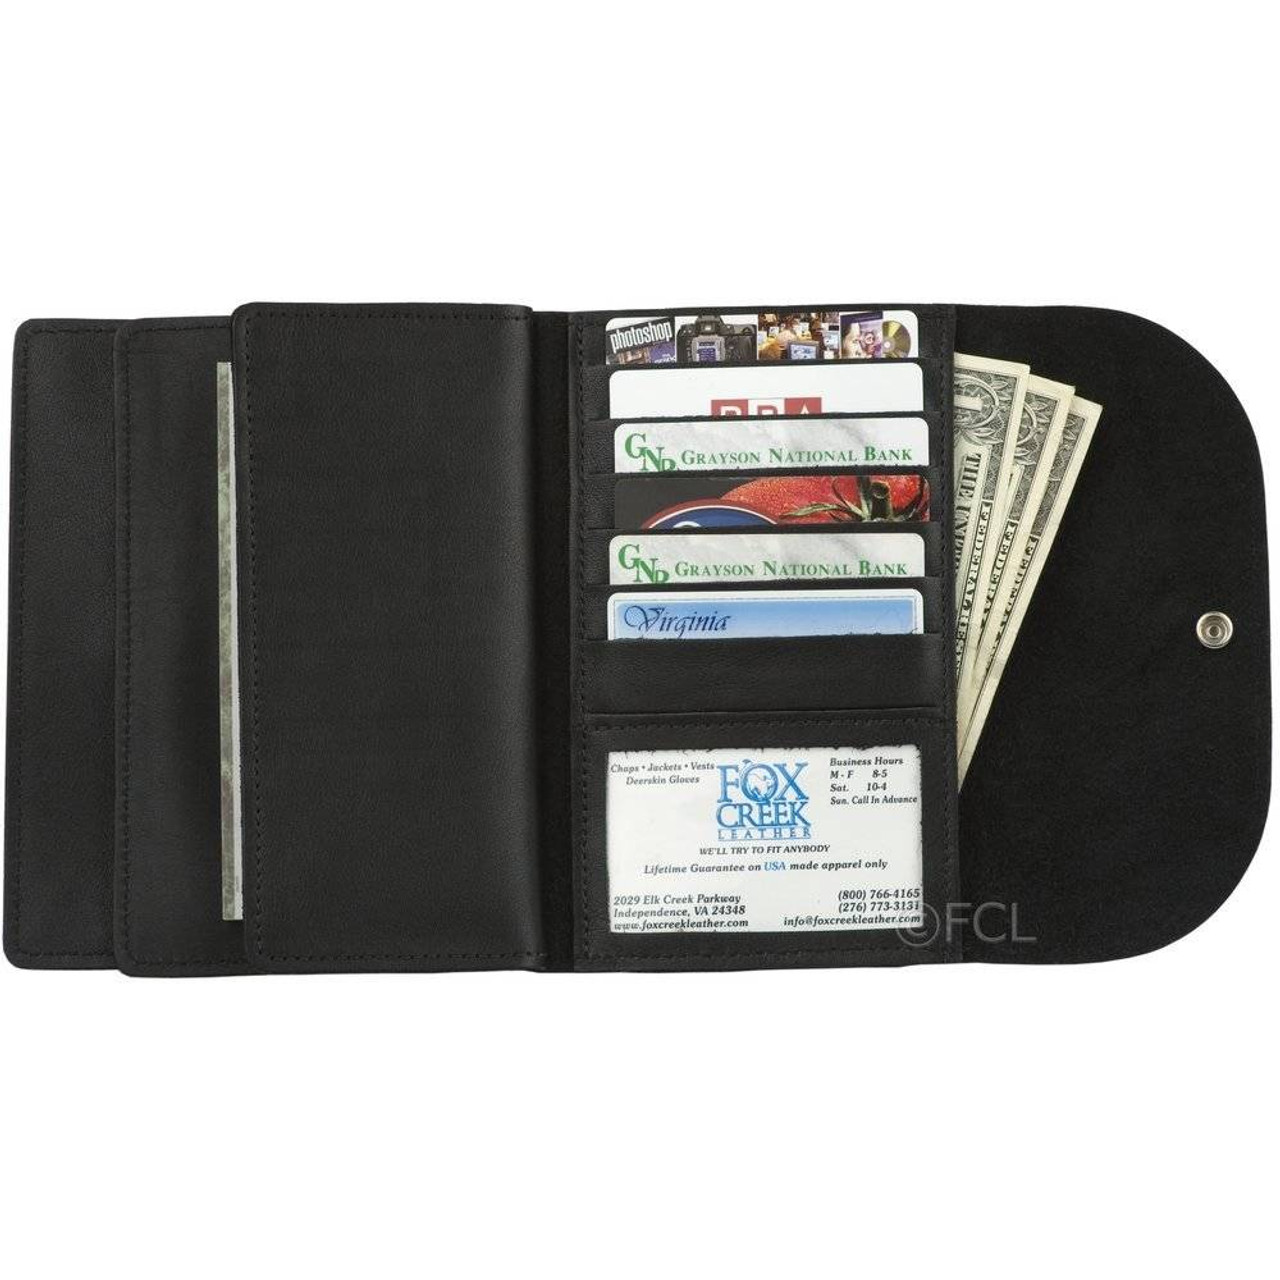 Long Leather Wallet for Women, EEEkit Trifold Purse, Ladies Credit Card  Holder, Large Capacity Travel Snap Clutch 